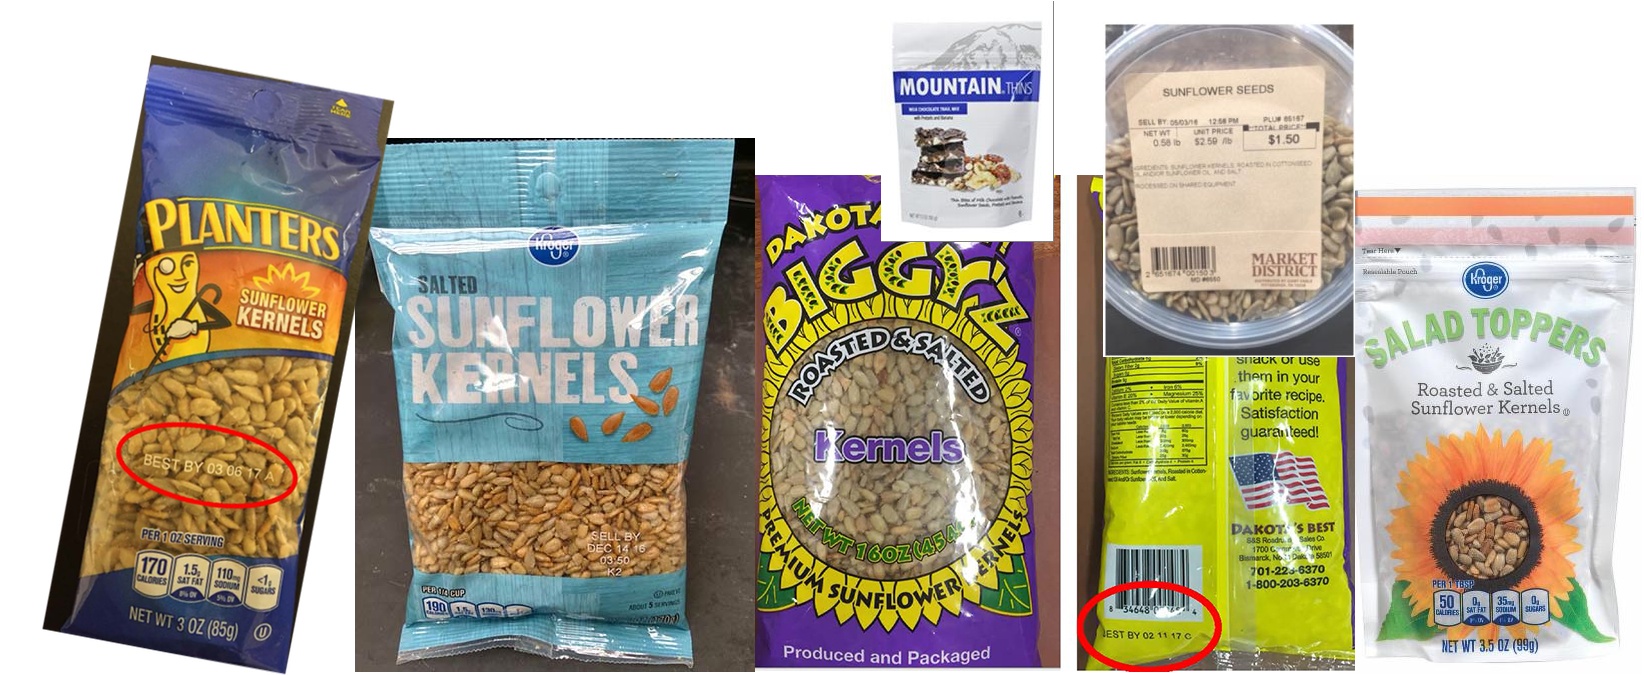 Sunflower Seeds, Snacks, And Salads Recalled For Possible Listeria Contamination